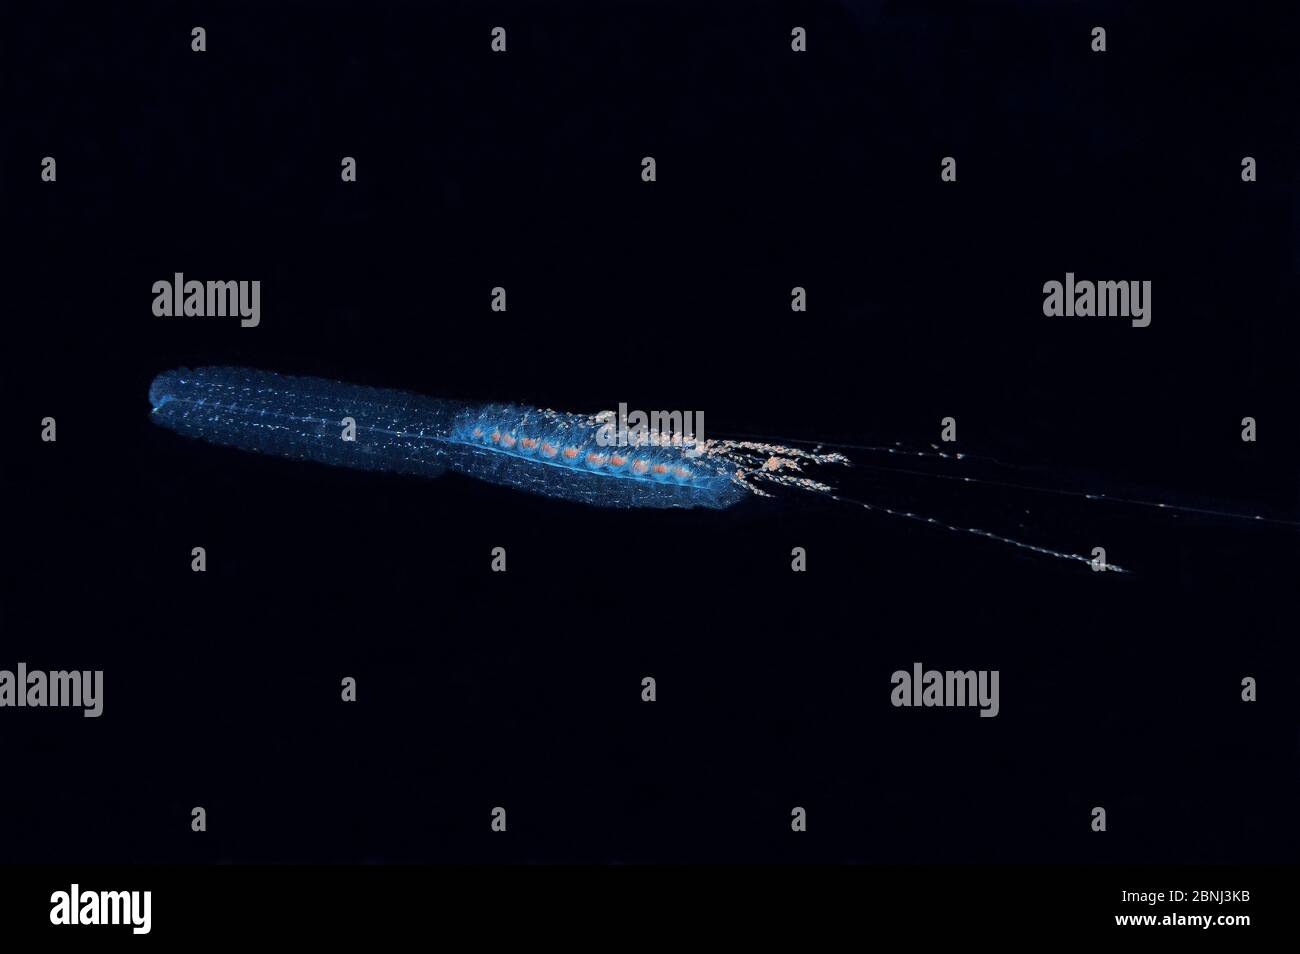 A siphonophore (Siphonophorae or Siphonophora) in open water at night, Palau, Philippine Sea Stock Photo